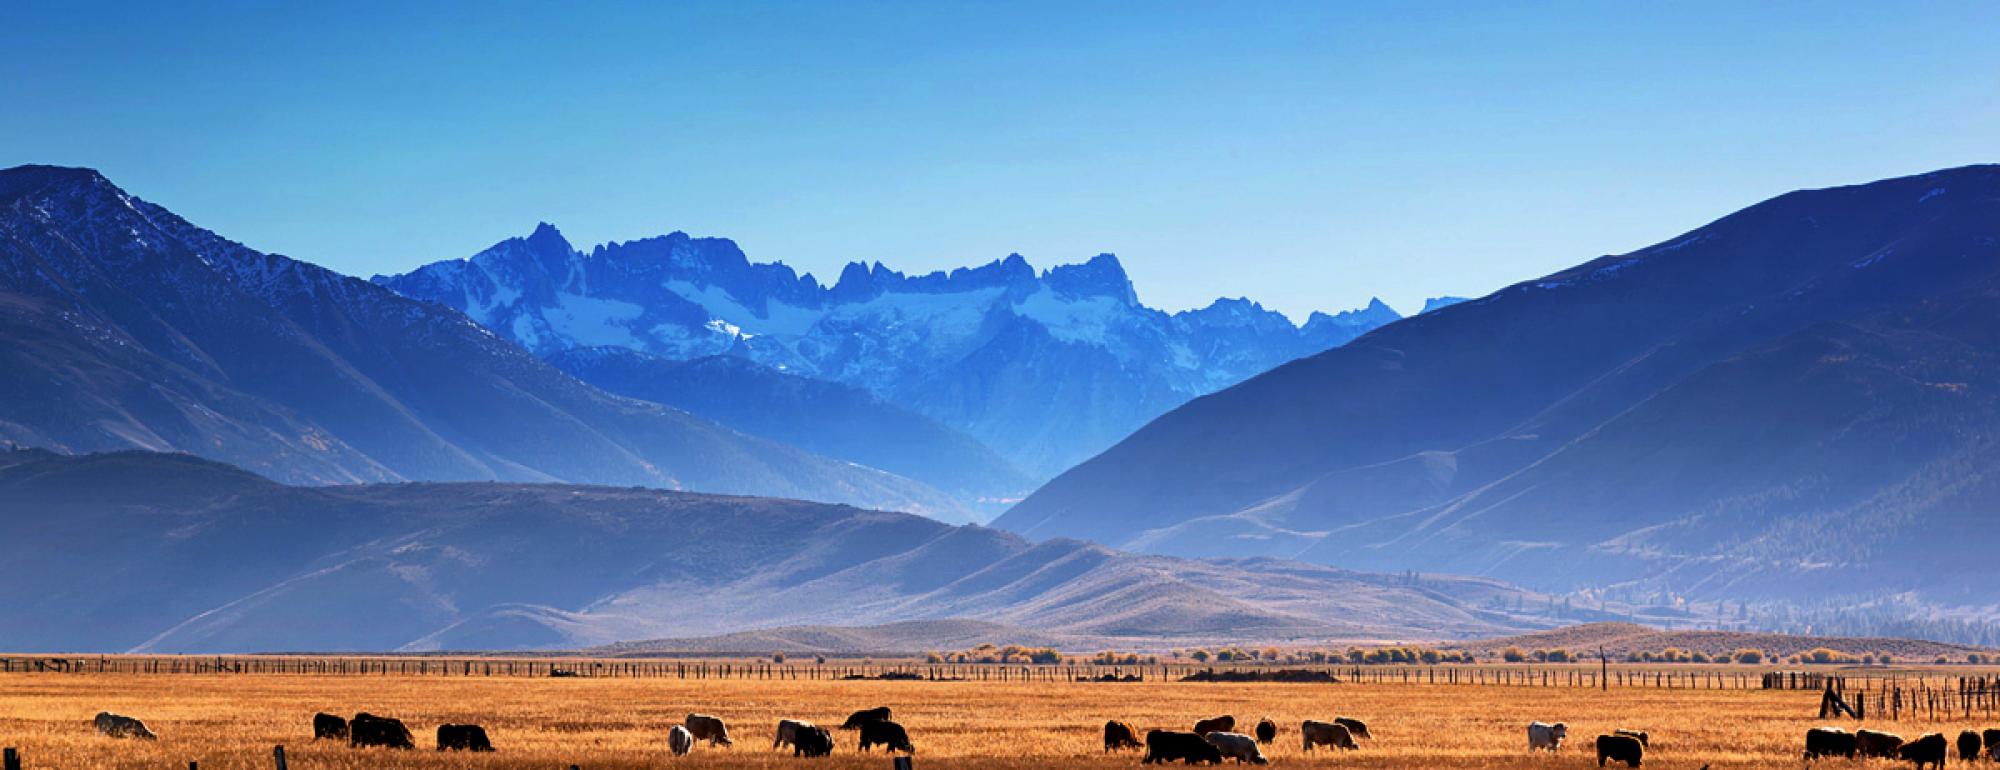 cattle grazing with blue mountains in background